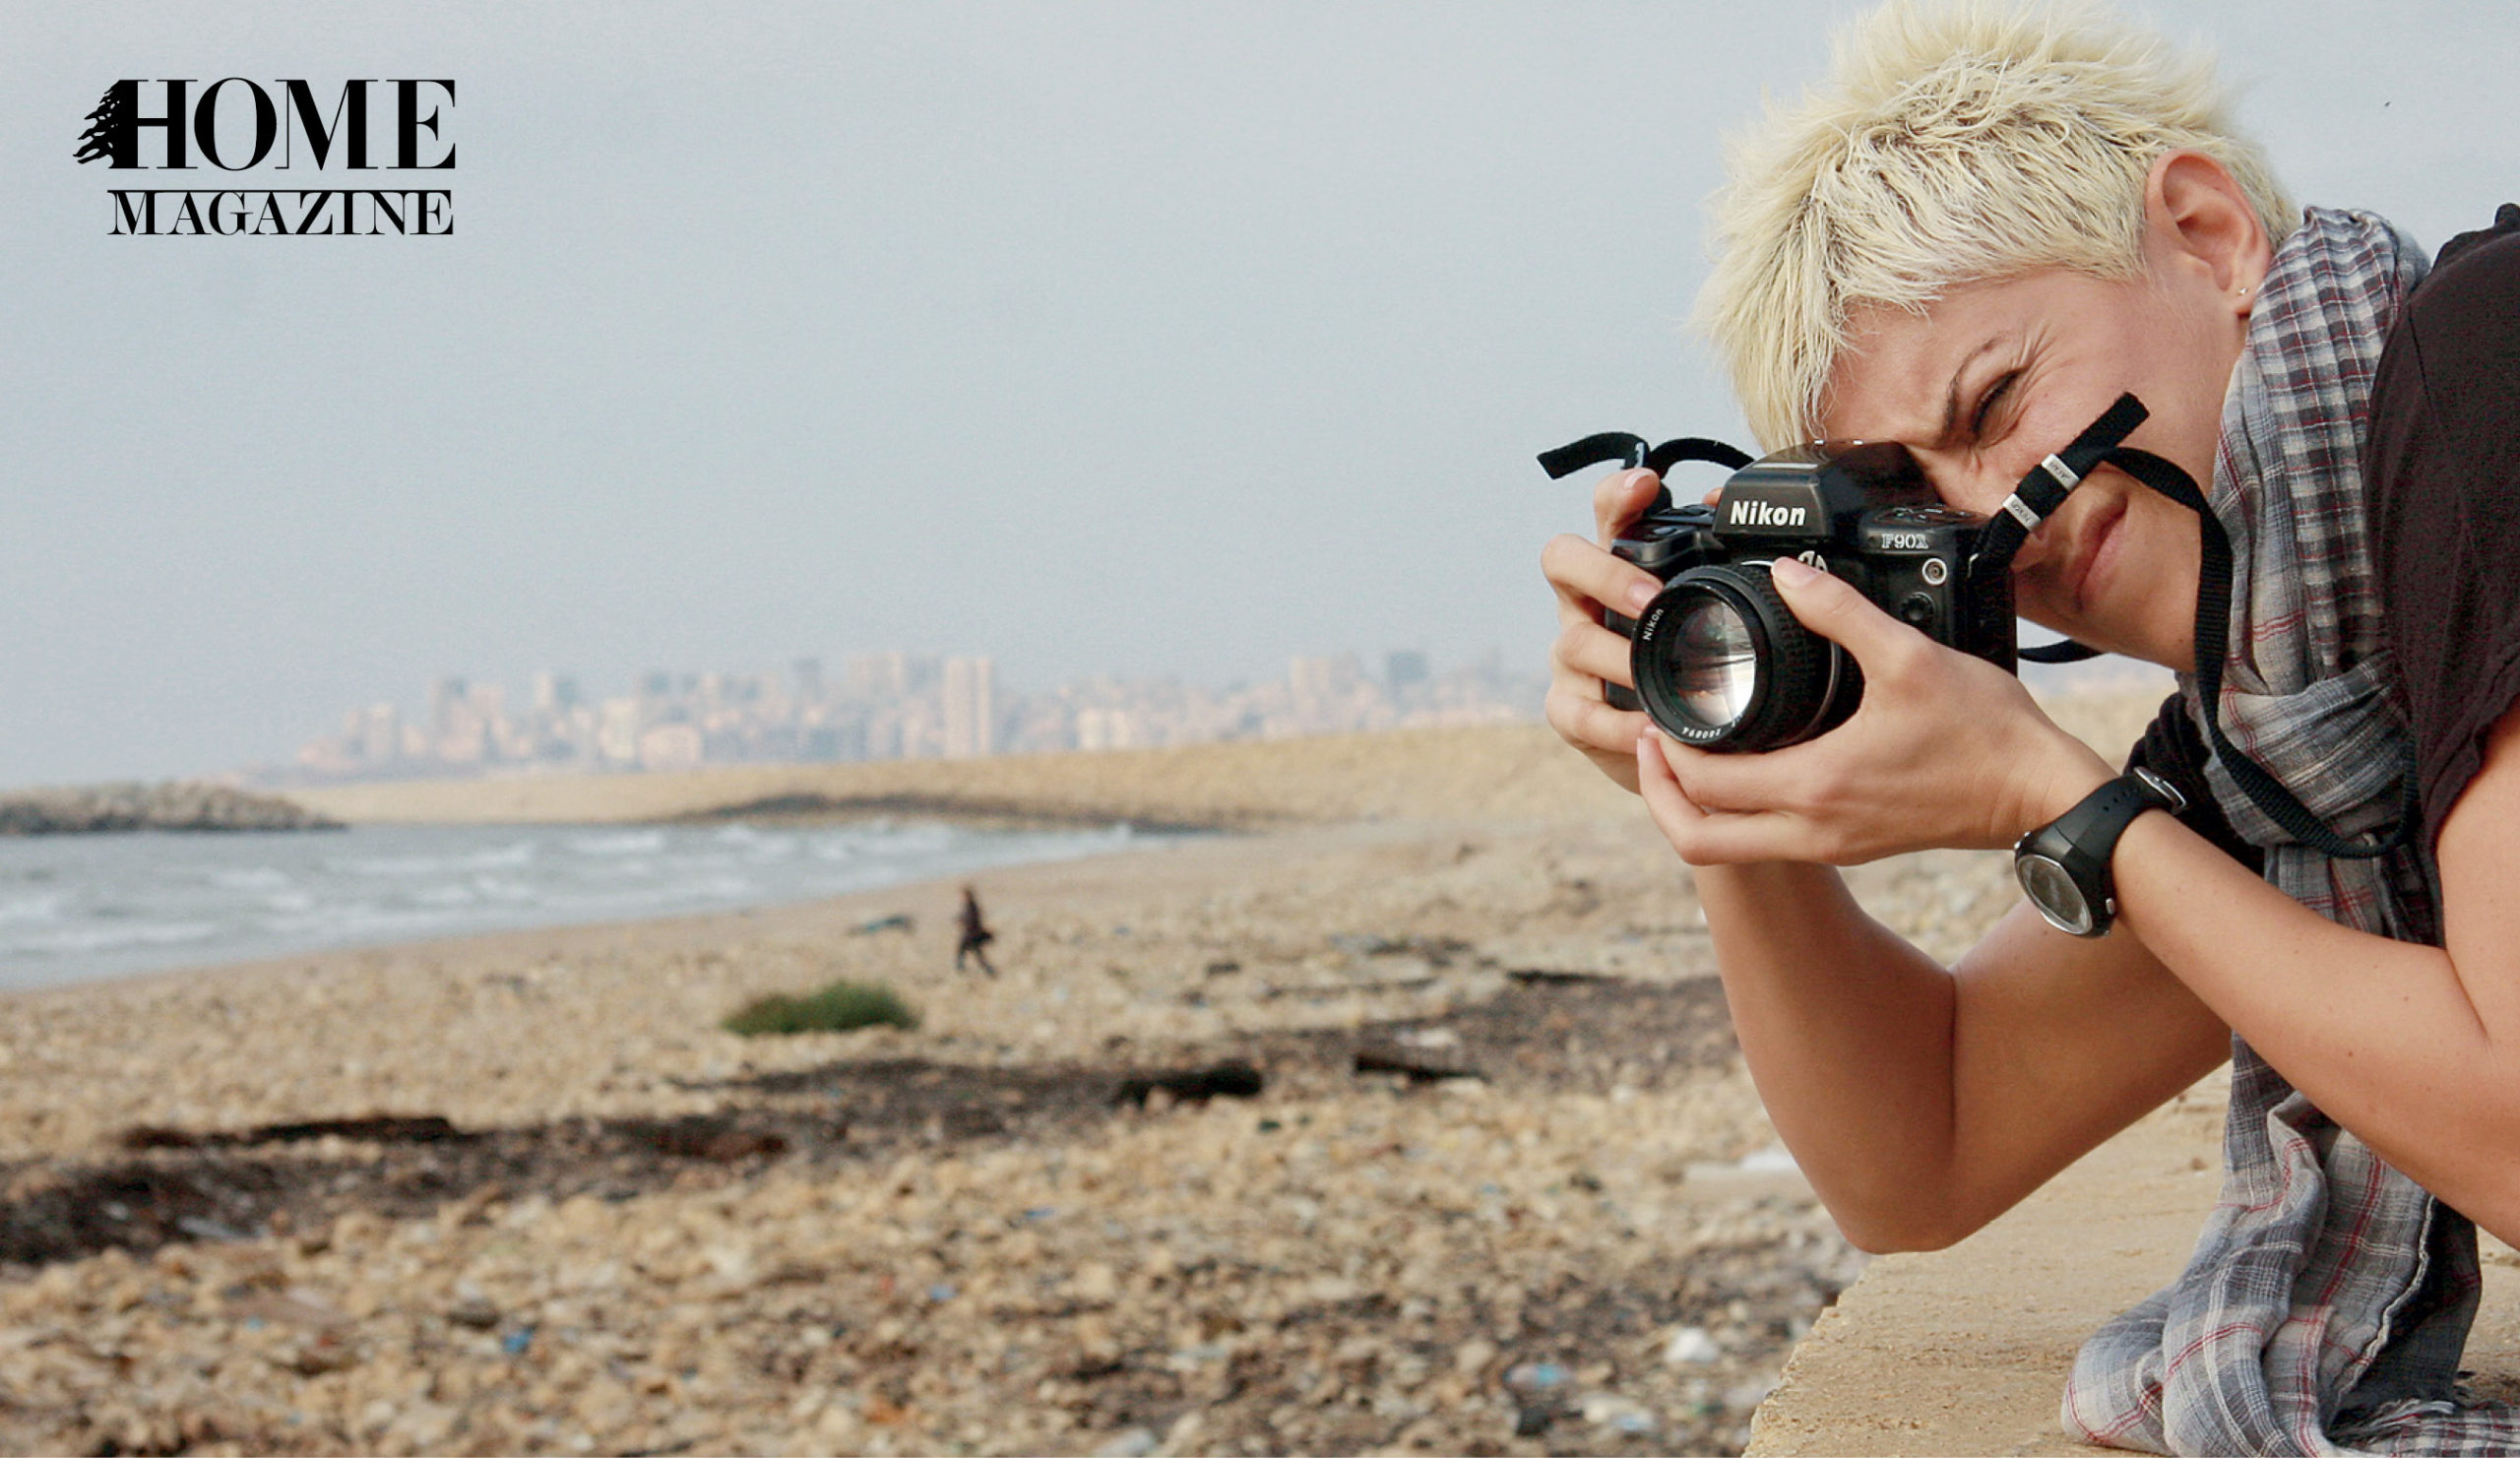 Woman with blond spike hair and scarf taking a picture with a black camera